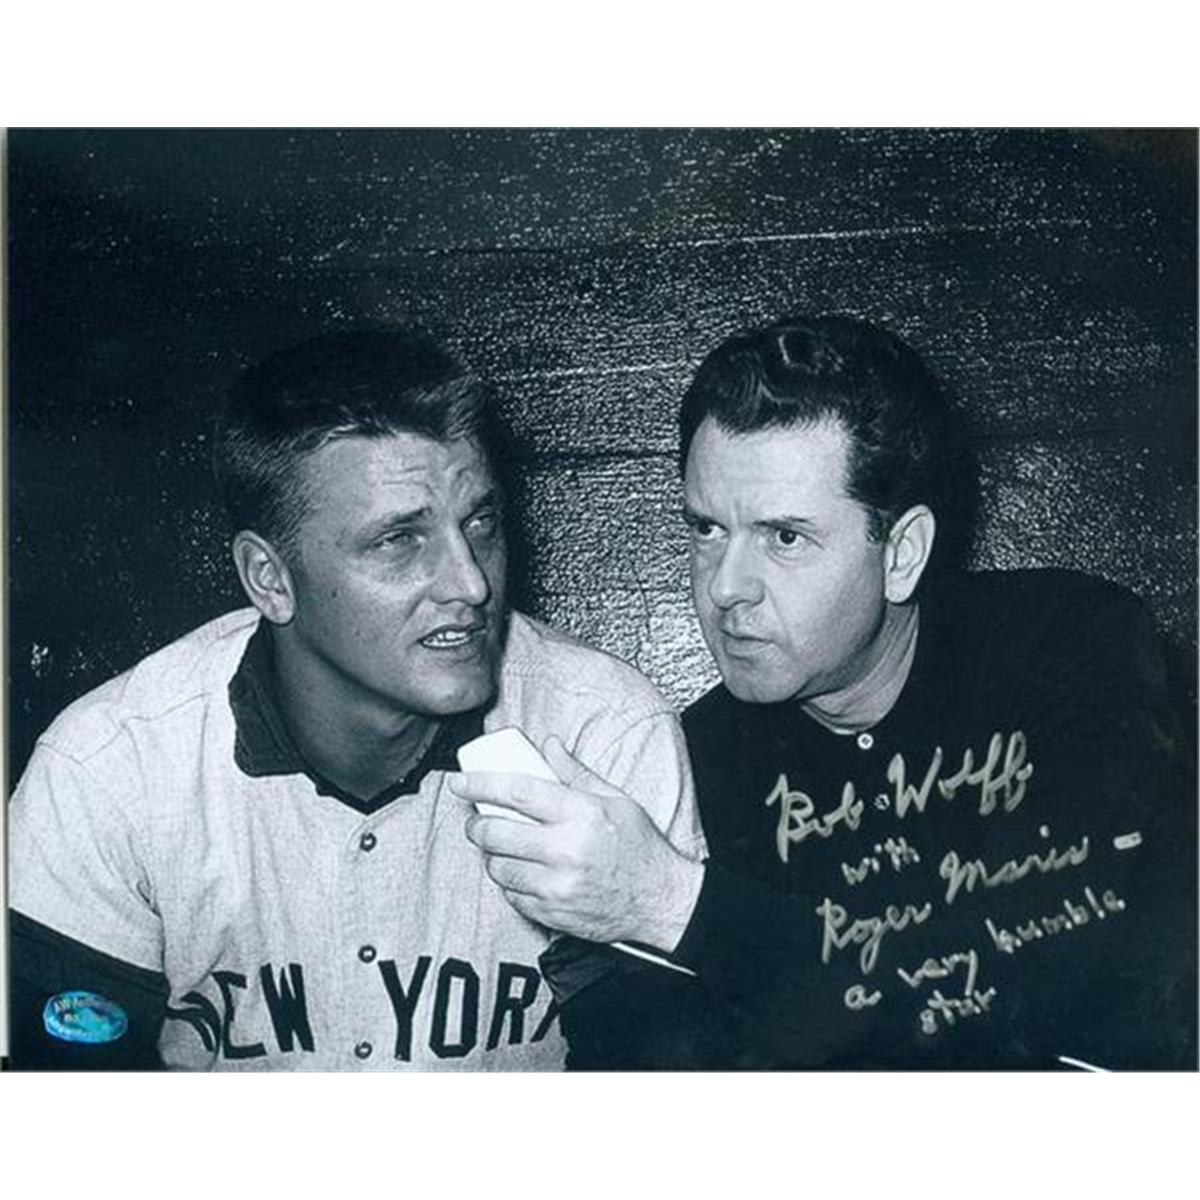 302566 8 x 10 in. Bob Wolff Signed Photo - Broadcaster Hall of Fame Pictured with Roger Maris Image No. SC3 -  Autograph Warehouse